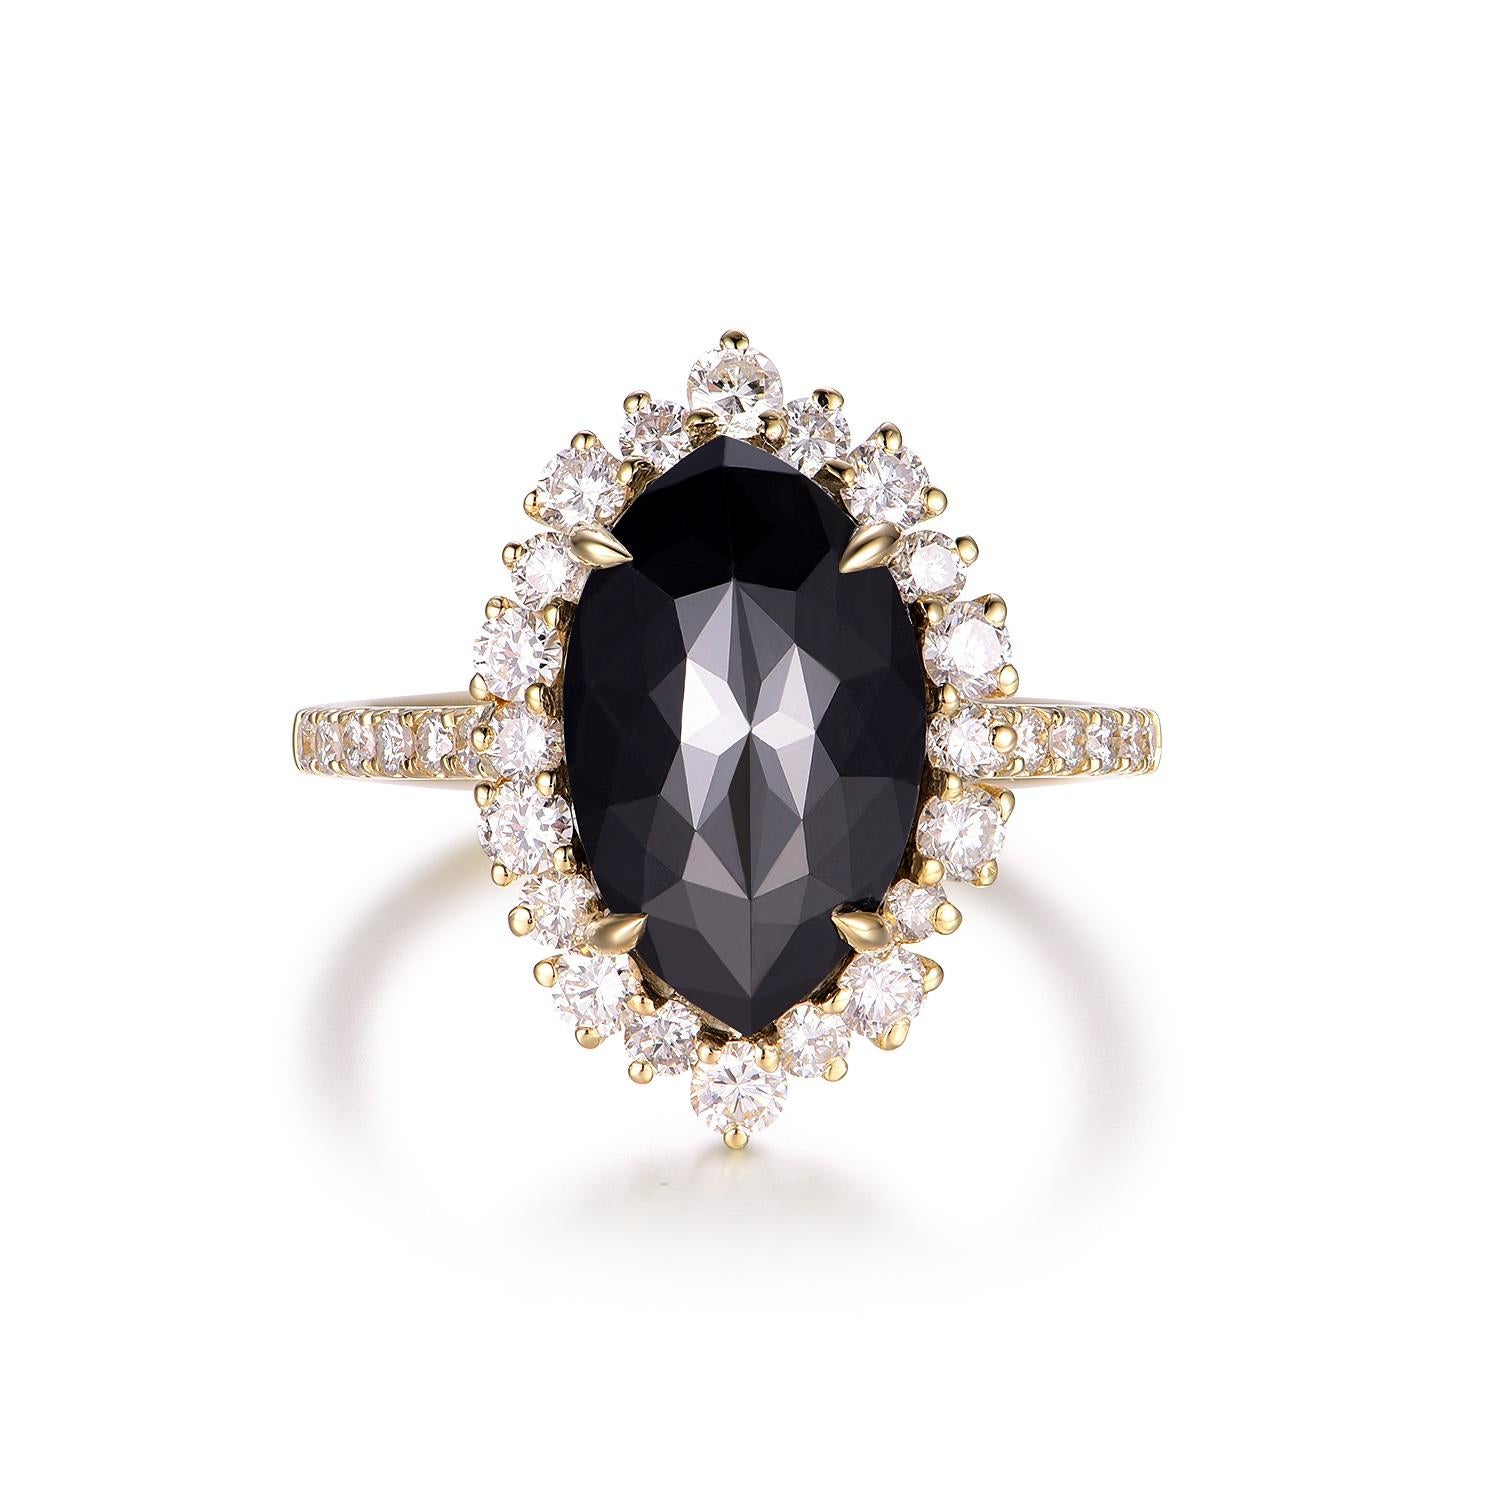 Indulge in the unparalleled beauty of this 14K yellow gold ring, boasting an IGI certified 5.70 carat black diamond. This majestic centerpiece captivates with its profound depth and intriguing allure, making it an instant symbol of